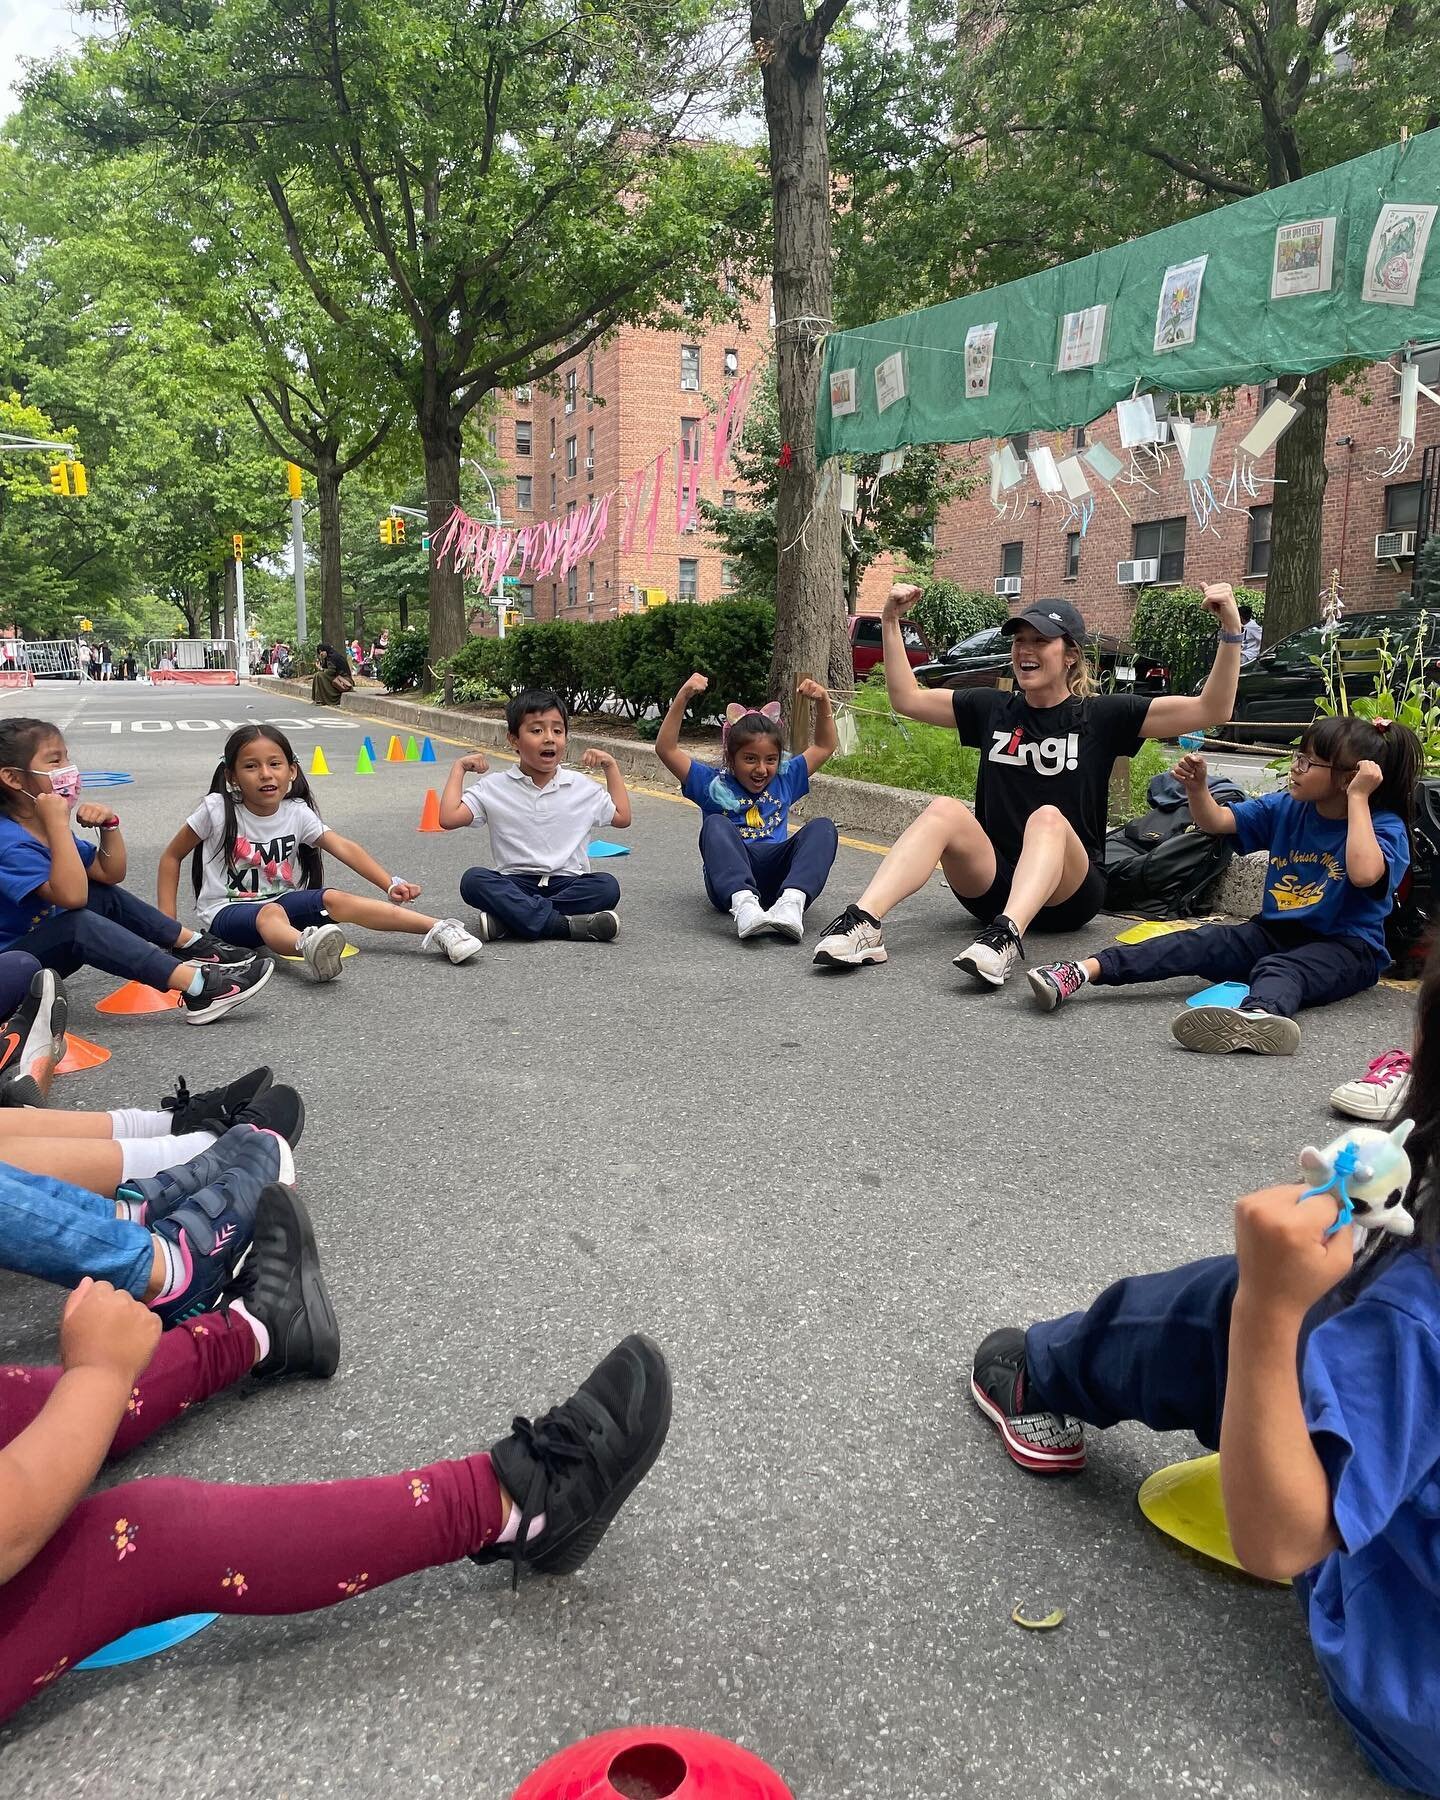 Looking for a FREE fun, active, kid-friendly activity?! 

Join us for one of our many Zing! classes happening this month. 

Here&rsquo;s a rundown: 

1️⃣ Saturday July 9: 10:00am at The Hester Street Fair Ice Cream Social 

2️⃣ Mondays from July 11-2